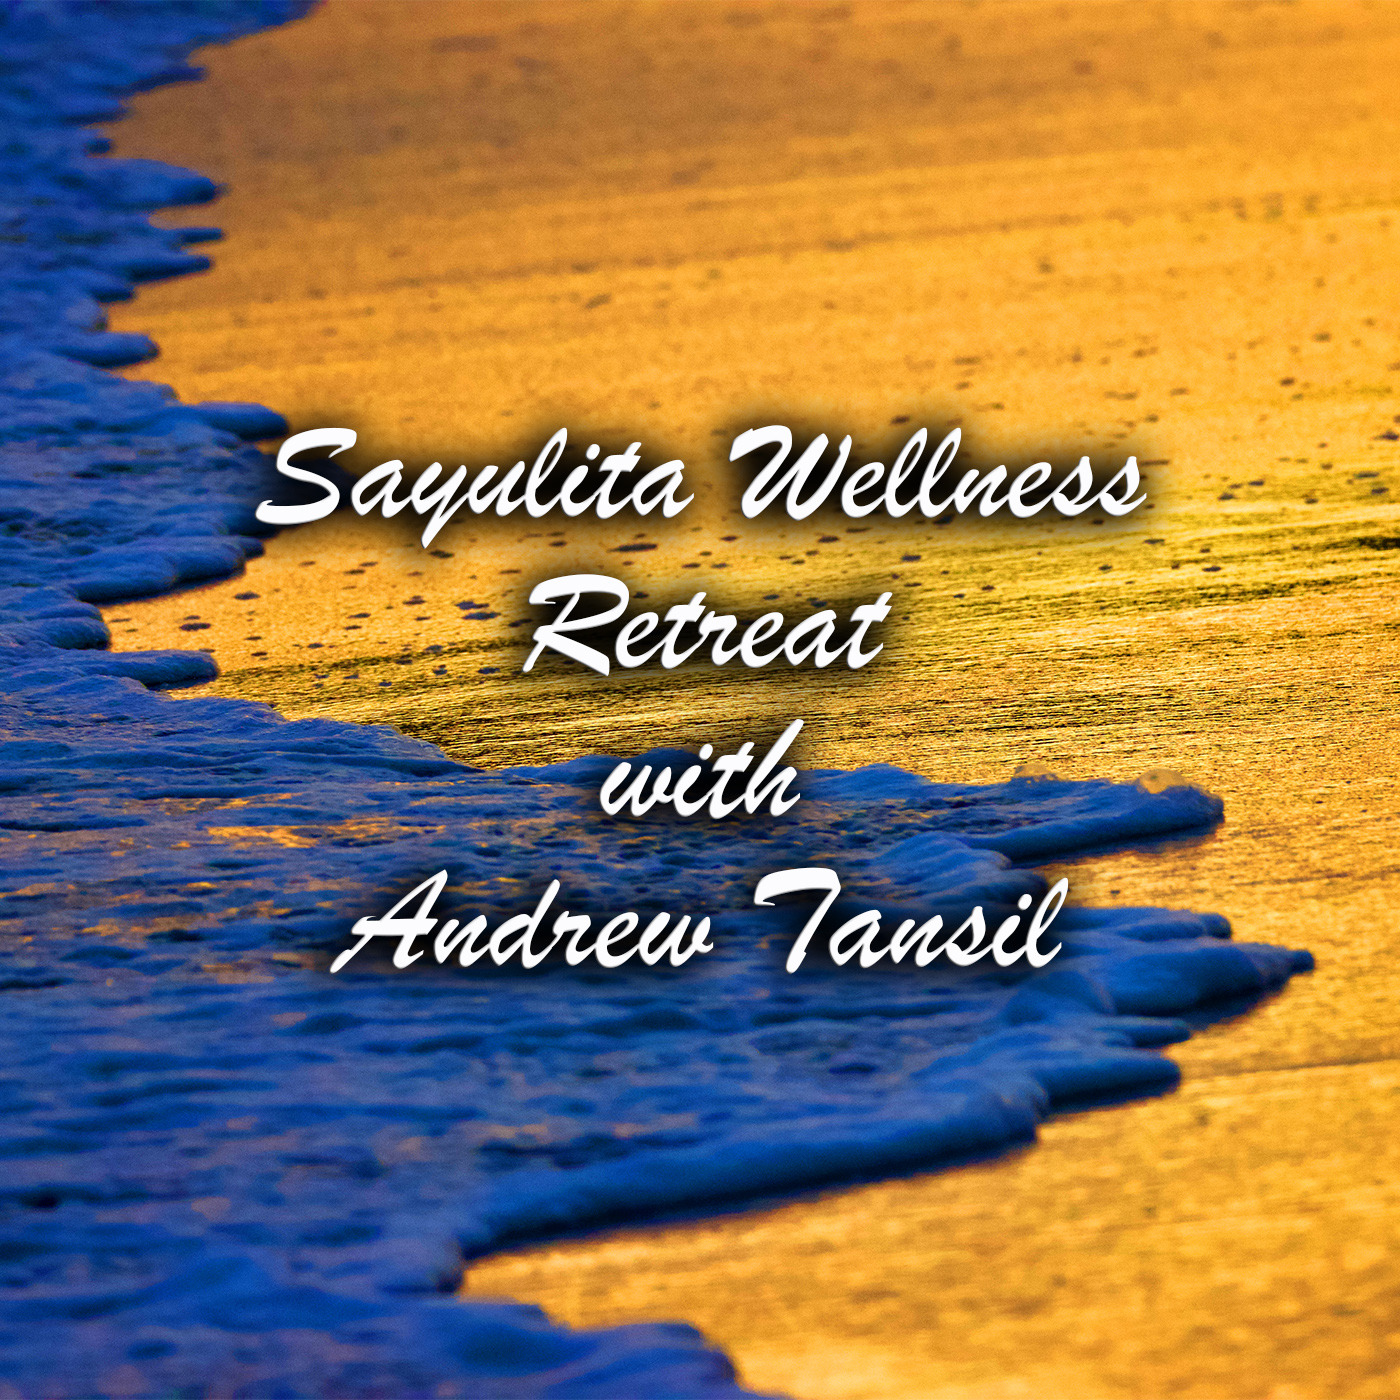 Episode 272: Sayulita Wellness Retreat with Andrew Tansil